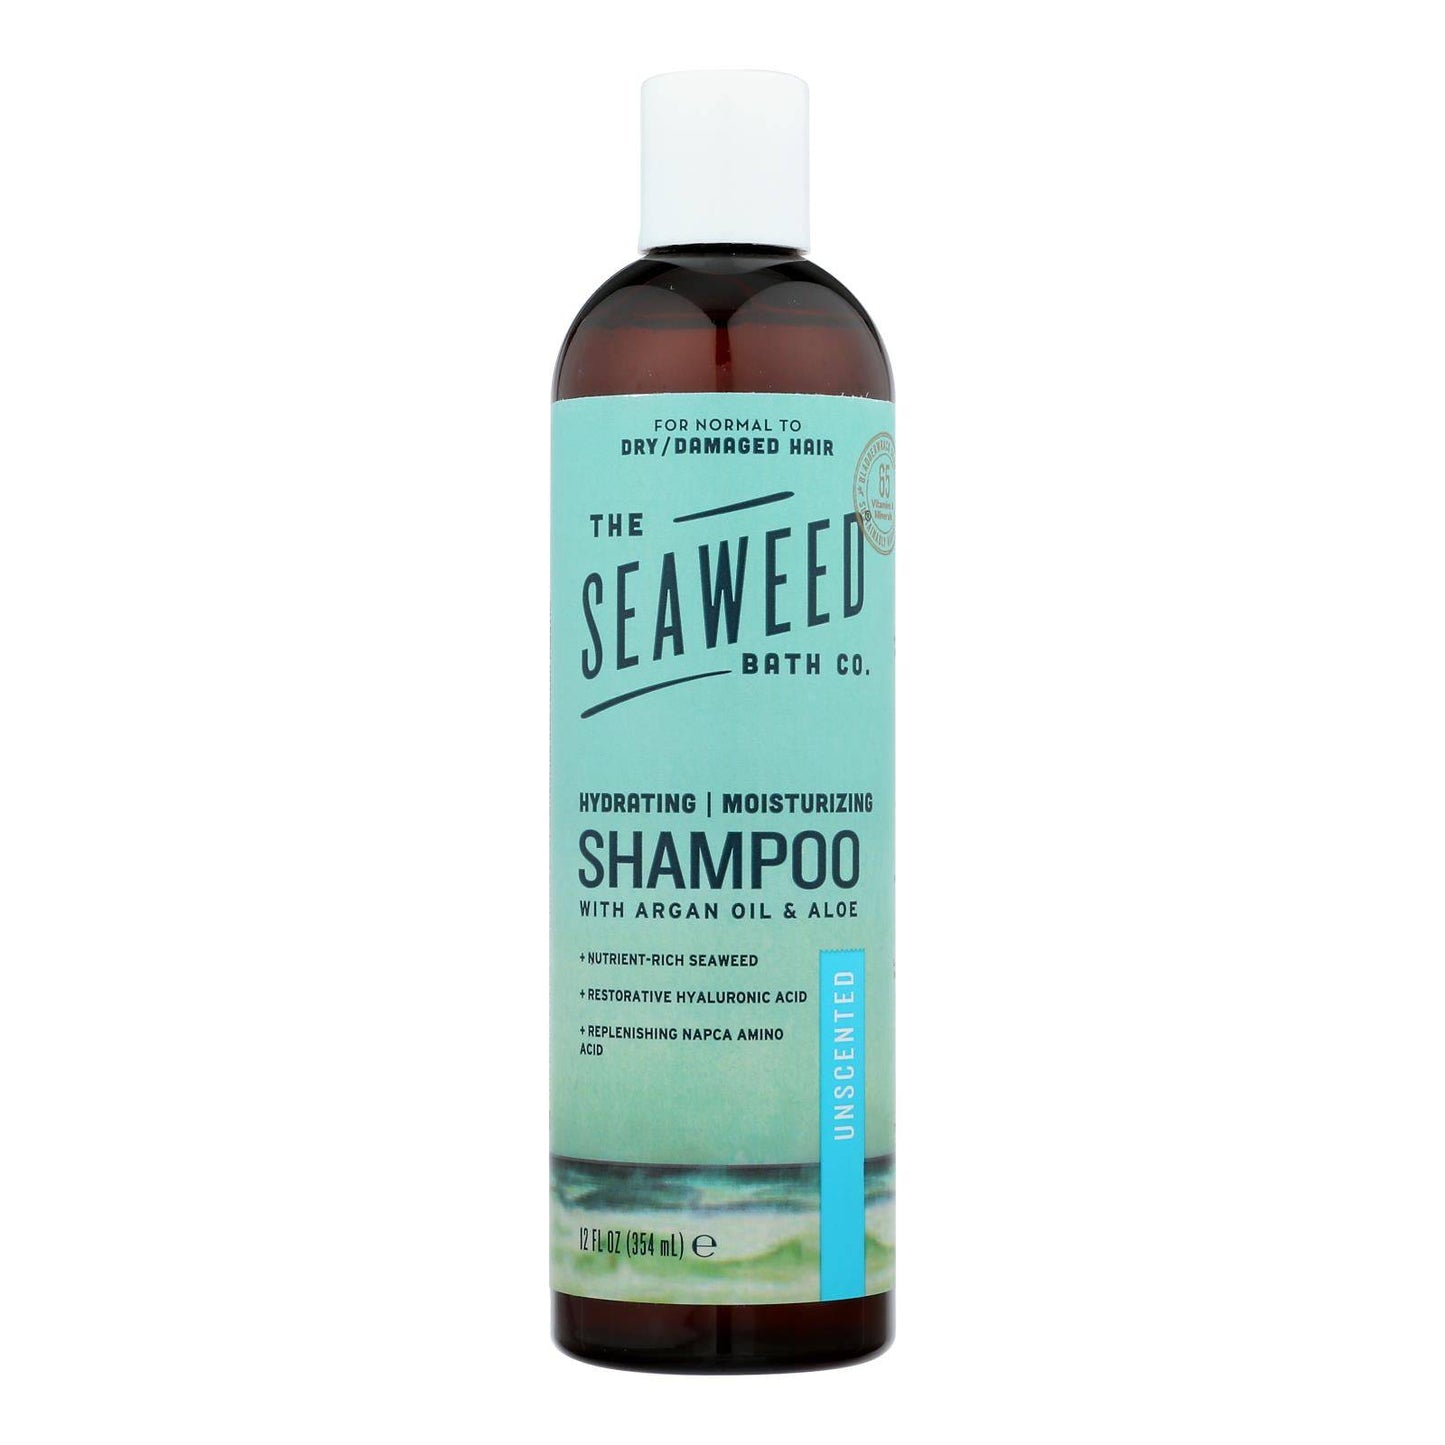 Buy The Seaweed Bath Co Shampoo - Moisturizing - Unscented - 12 Fl Oz  at OnlyNaturals.us